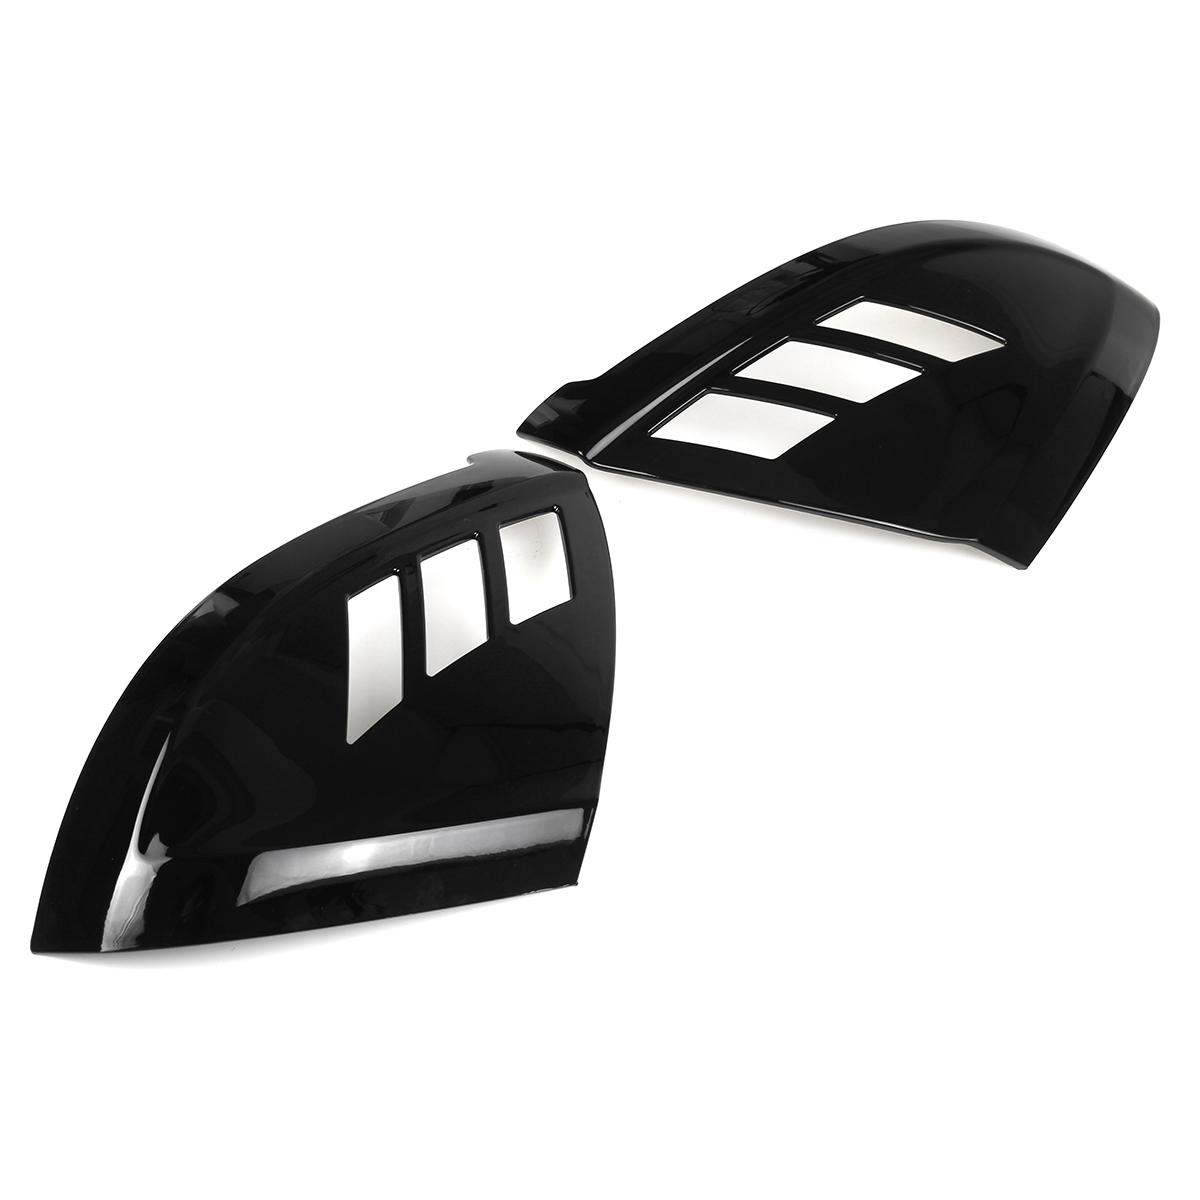 1 Pair Glossy Black Rear View Mirror Cap Cover Add on Case Side Mirror Car Modification for AUDI A4 S4 RS4 A5 S5 RS5 All Models 2017-2020 - Auto GoShop